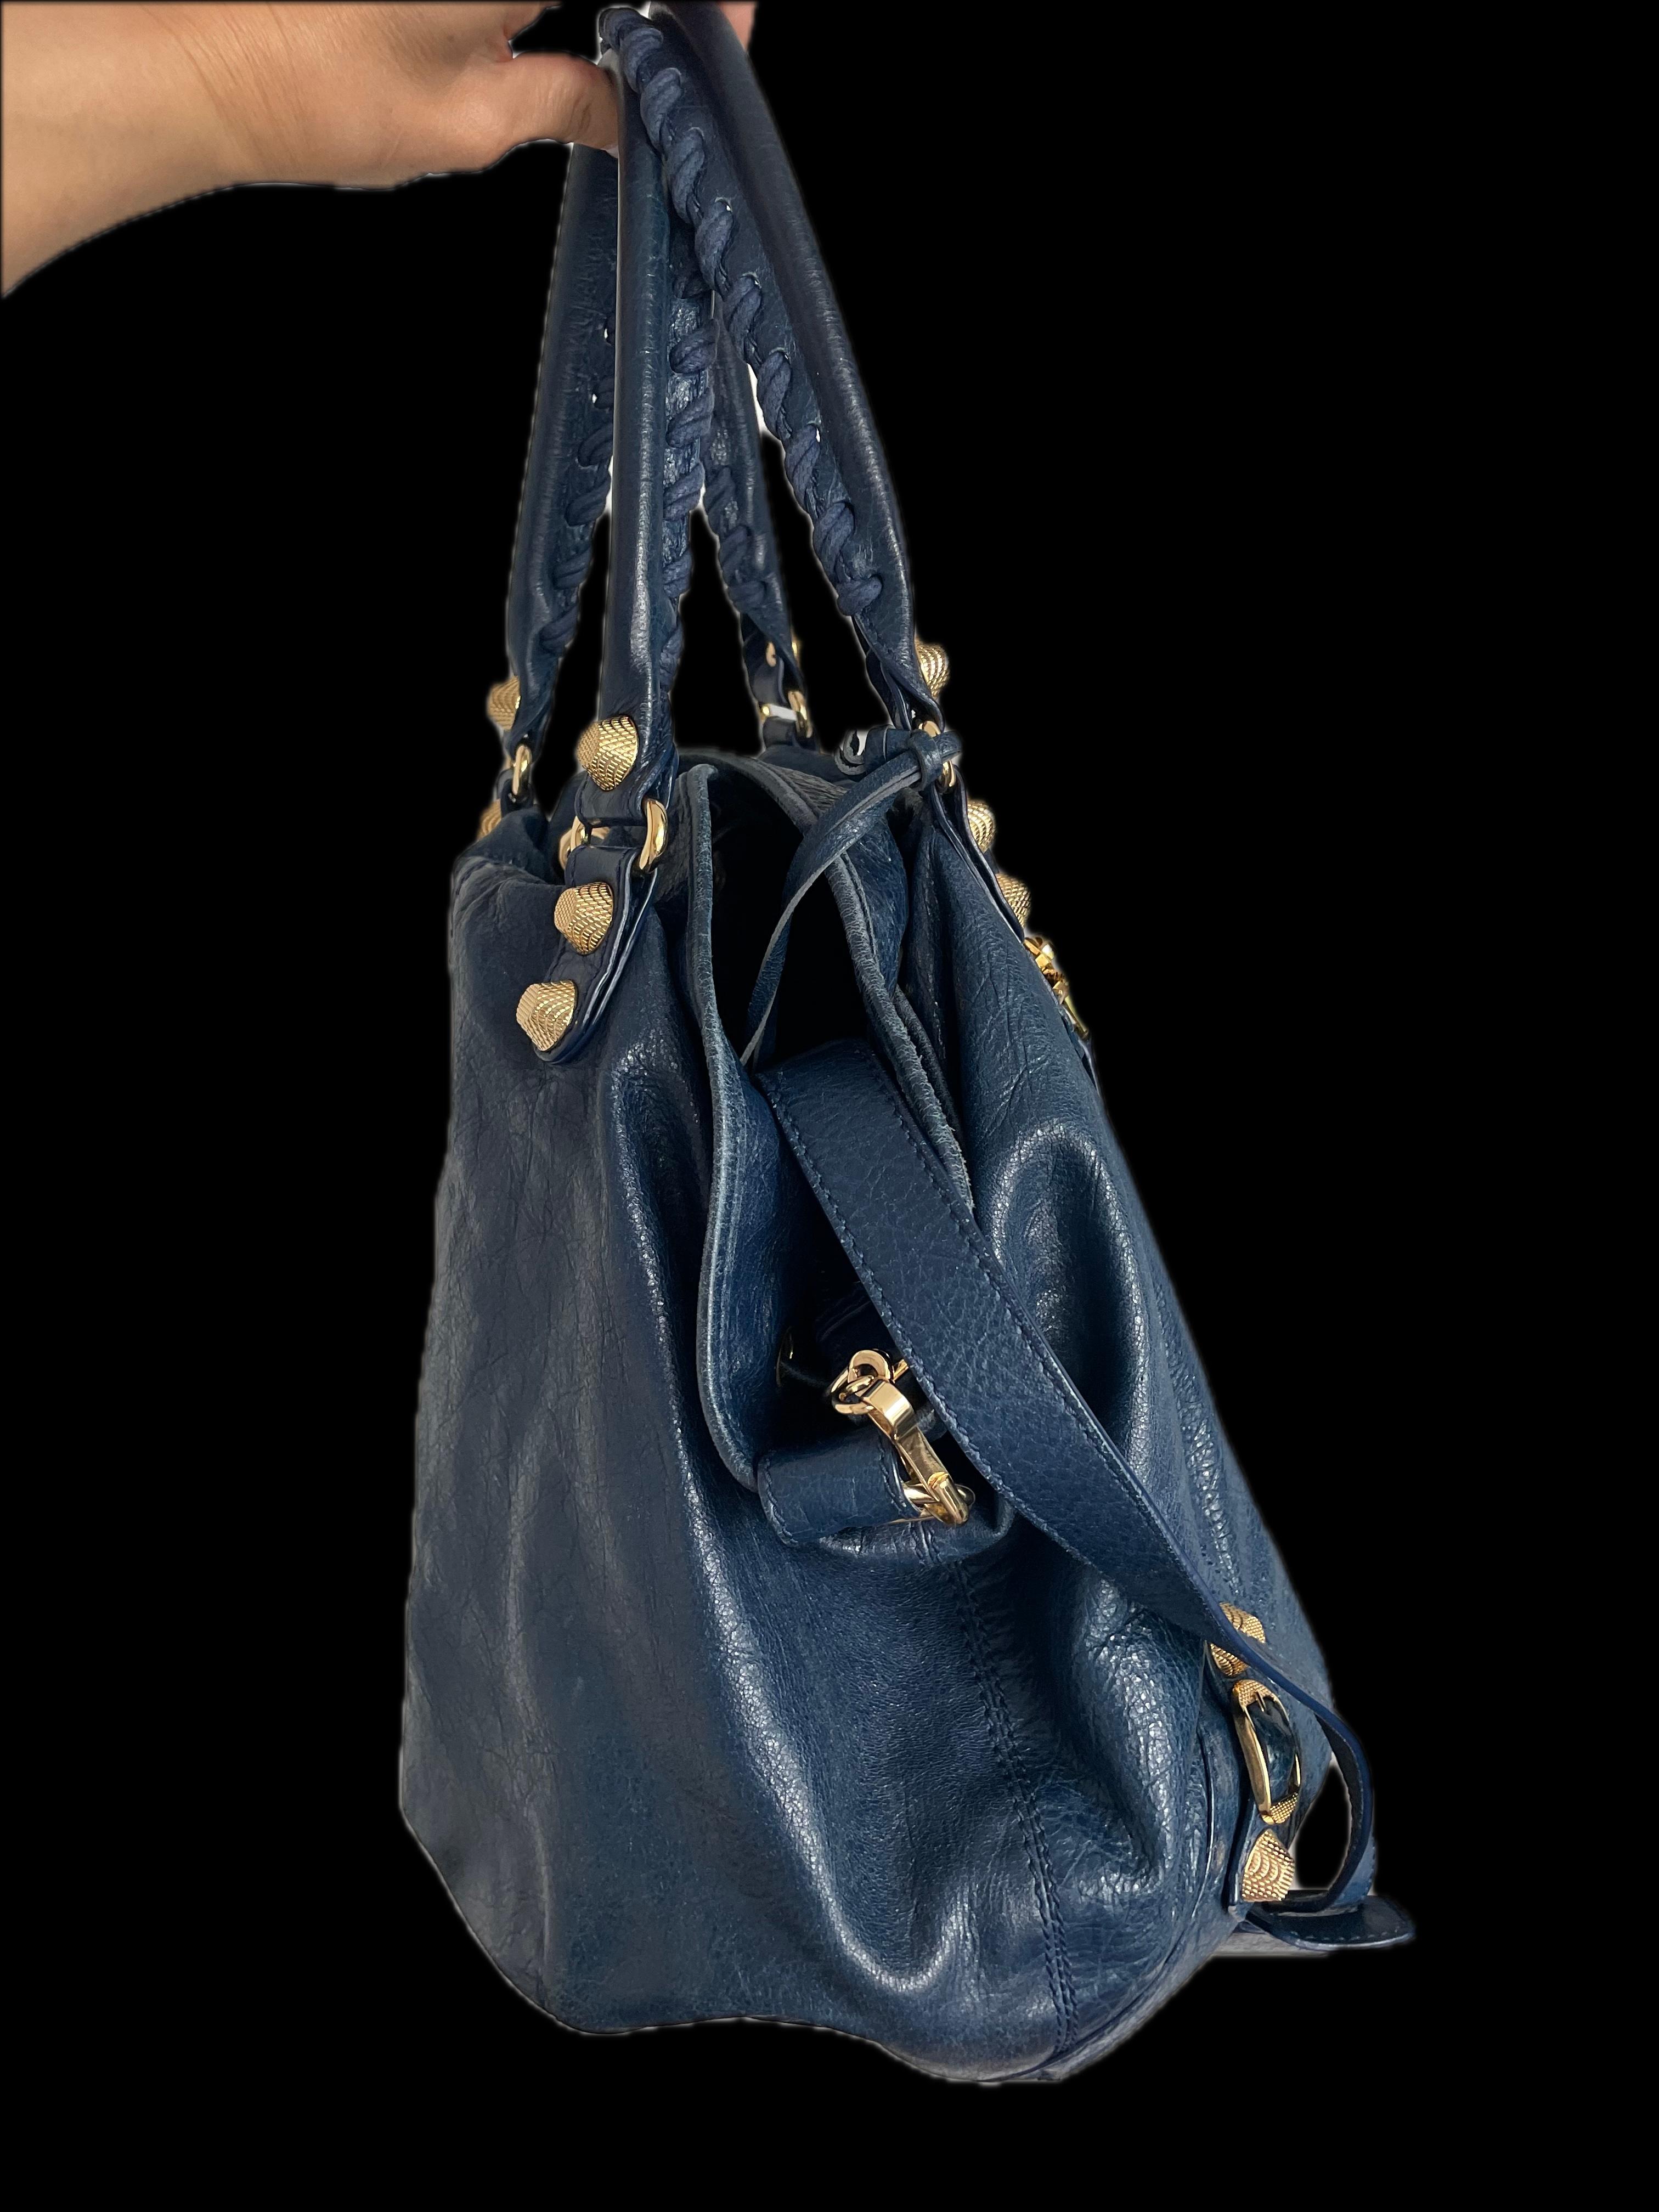 Experience the perfect blend of luxury and functionality with the Balenciaga Indigo Bucket Bag. This stylish and versatile bag is designed to complement your everyday, work, and travel needs with ease and sophistication. Crafted with Balenciaga's